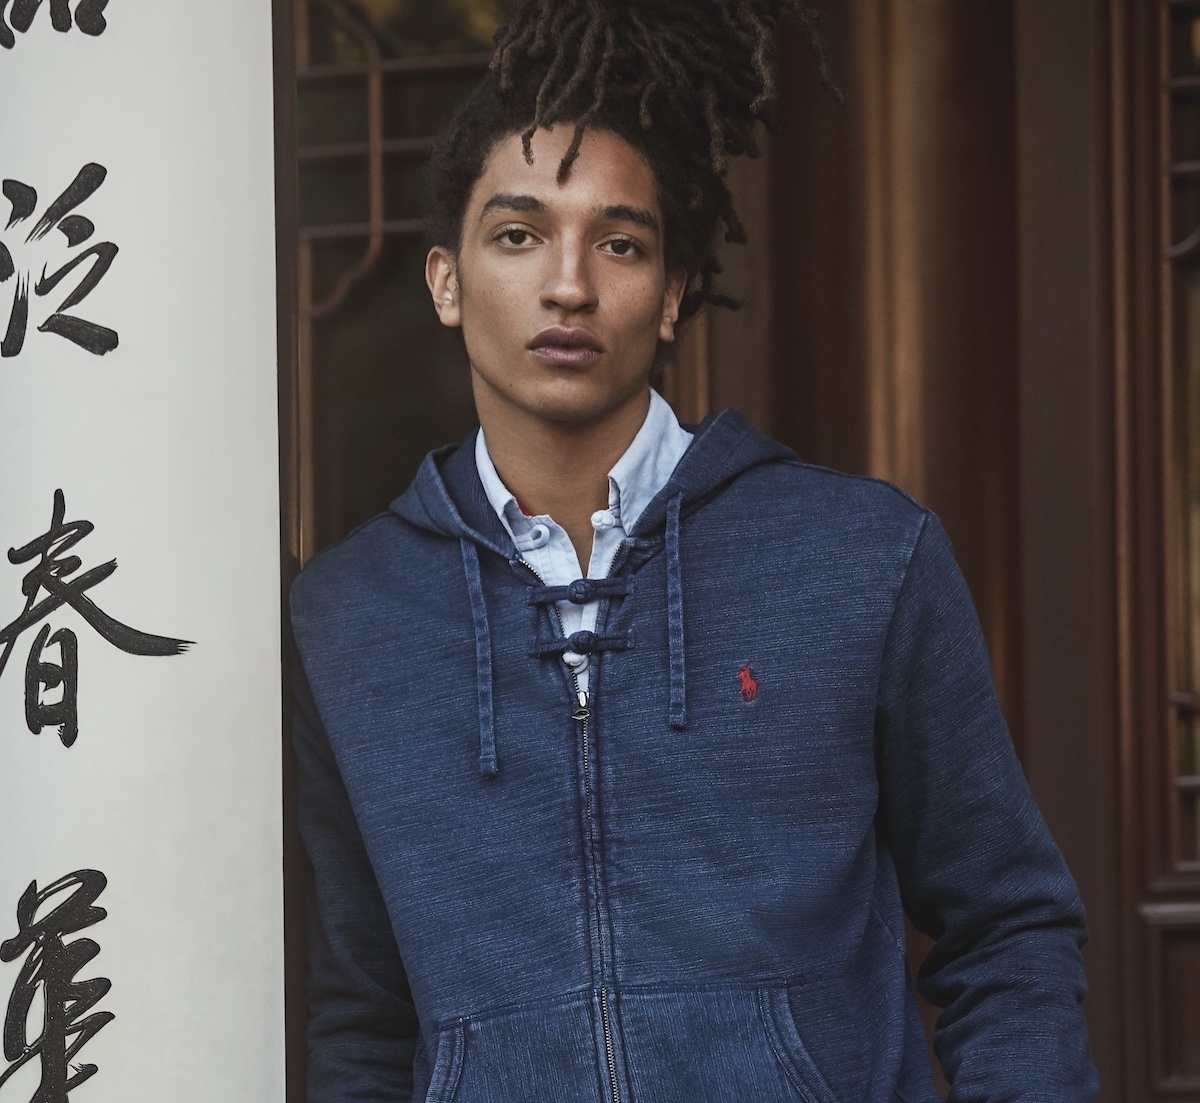 Ralph Lauren Collaborate with Hong Kong Based CLOT on Limited Edition Capsule